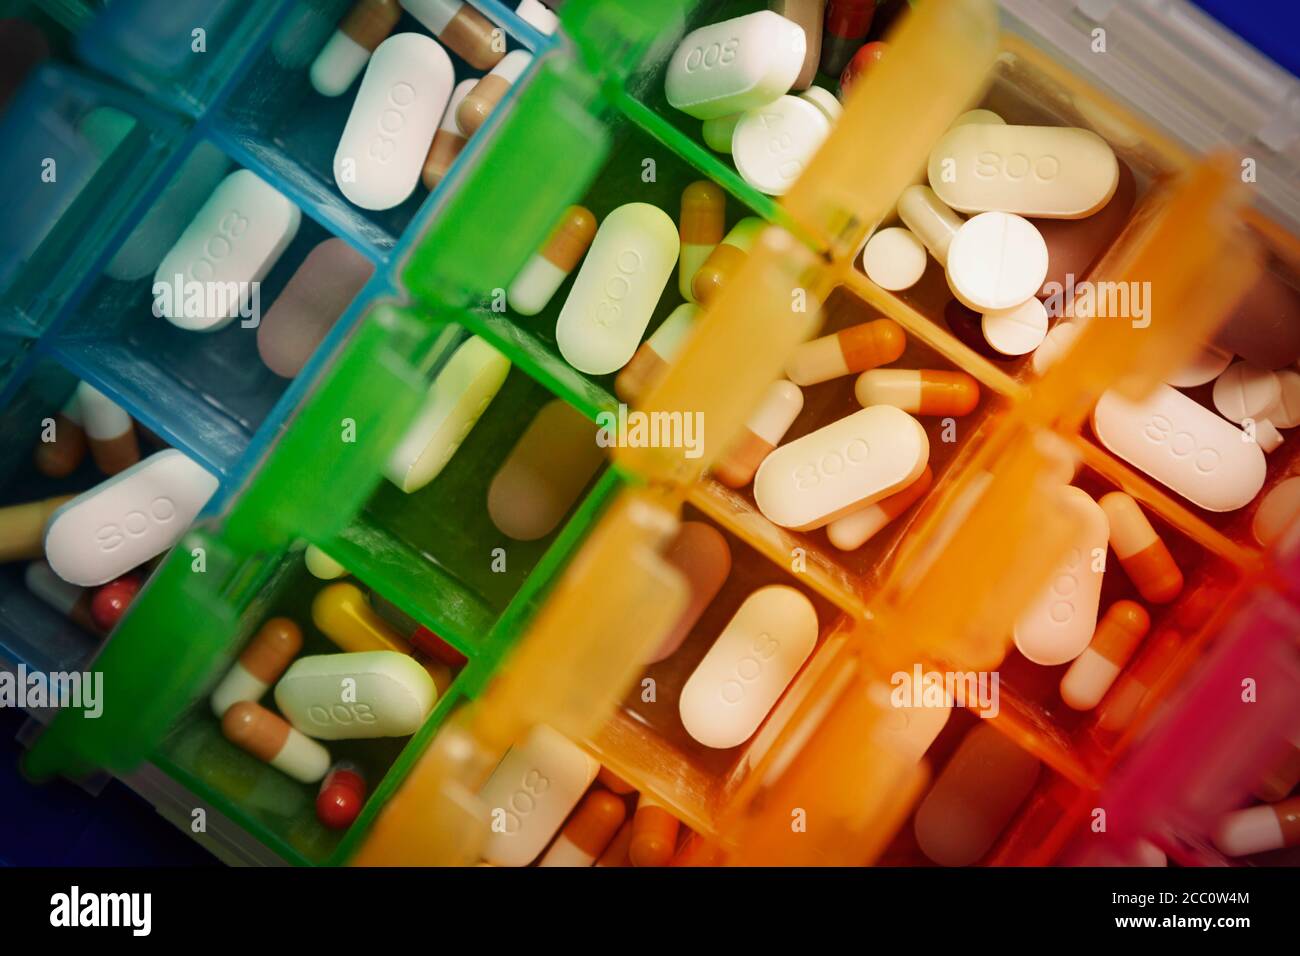 Medication, including anti rejection drugs, after a kidney transplant, stored in a weekly pill box Stock Photo